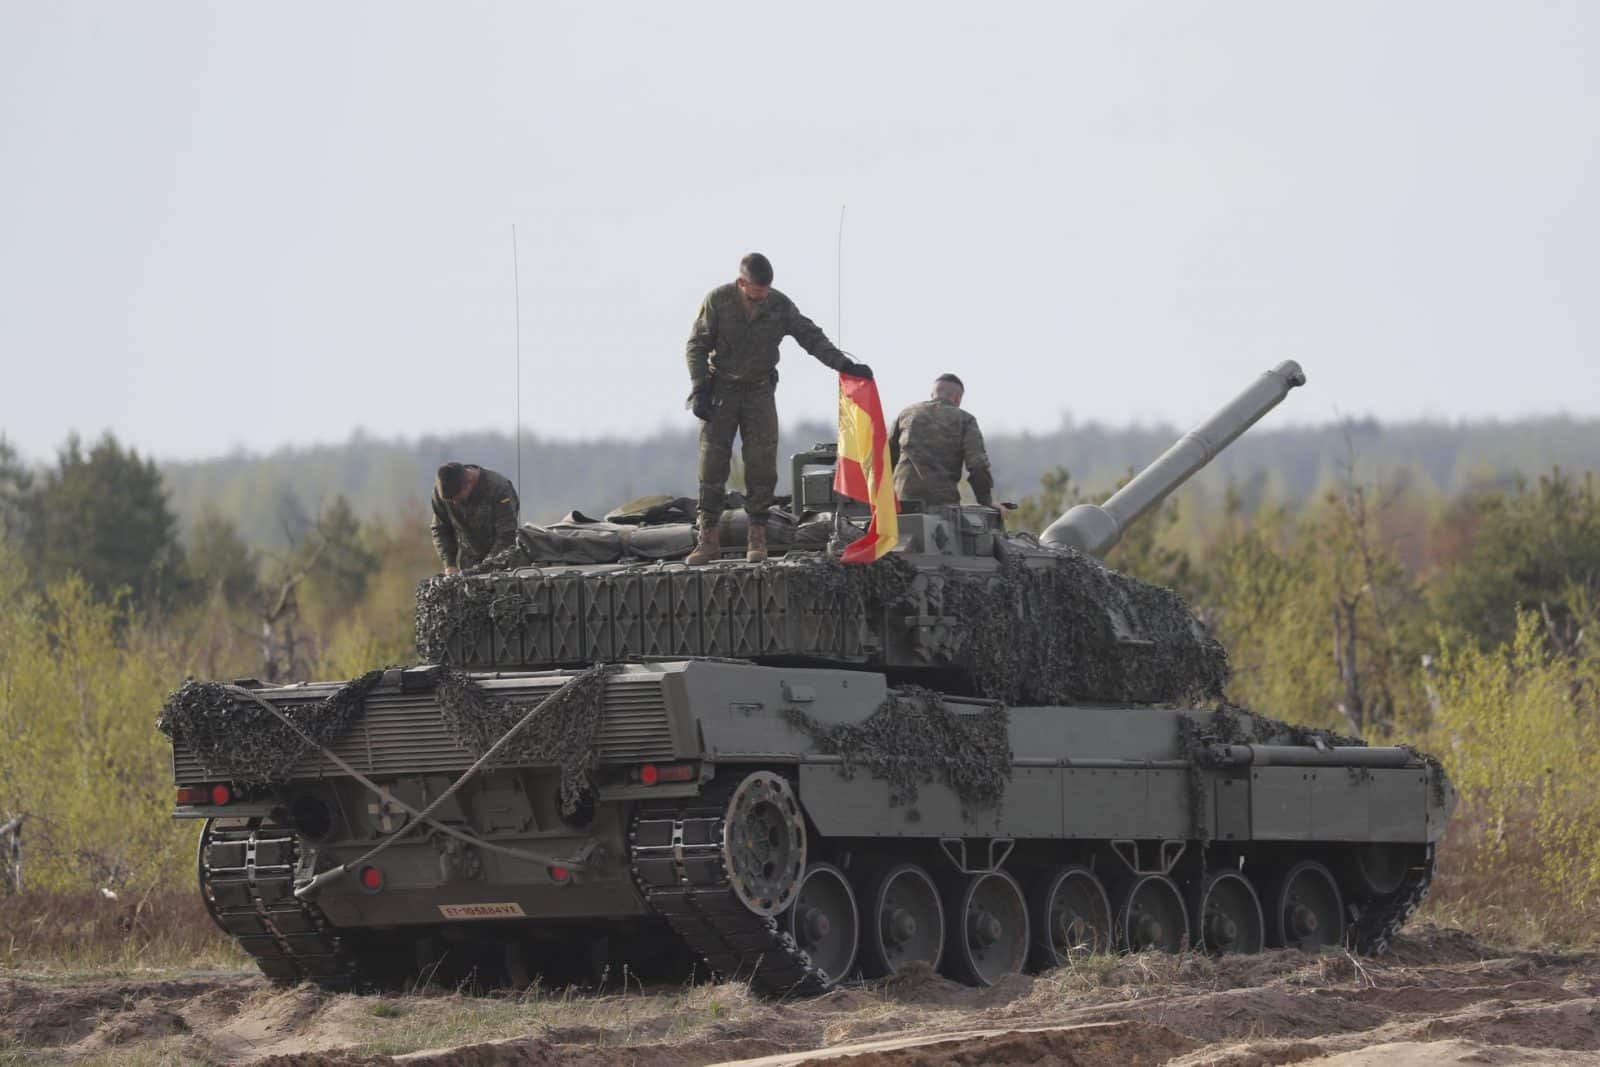 Spain delivered the first batch of Leopard 2 tanks to Ukraine